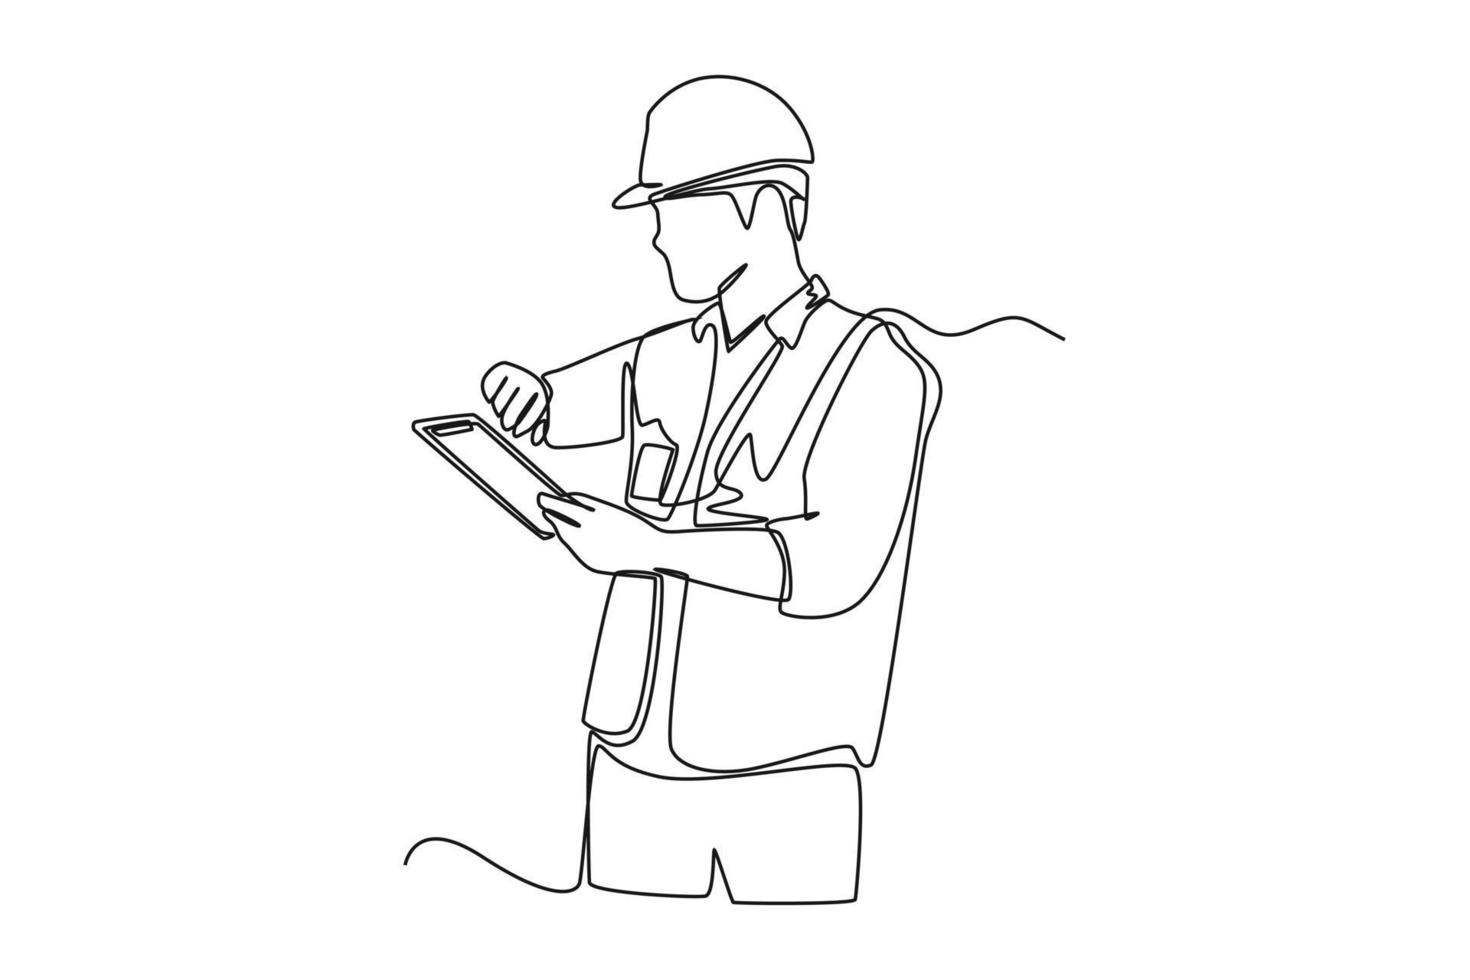 Single one line drawing Foreman check timing and using tablet control. Supply chain management concept. Continuous line draw design graphic vector illustration.